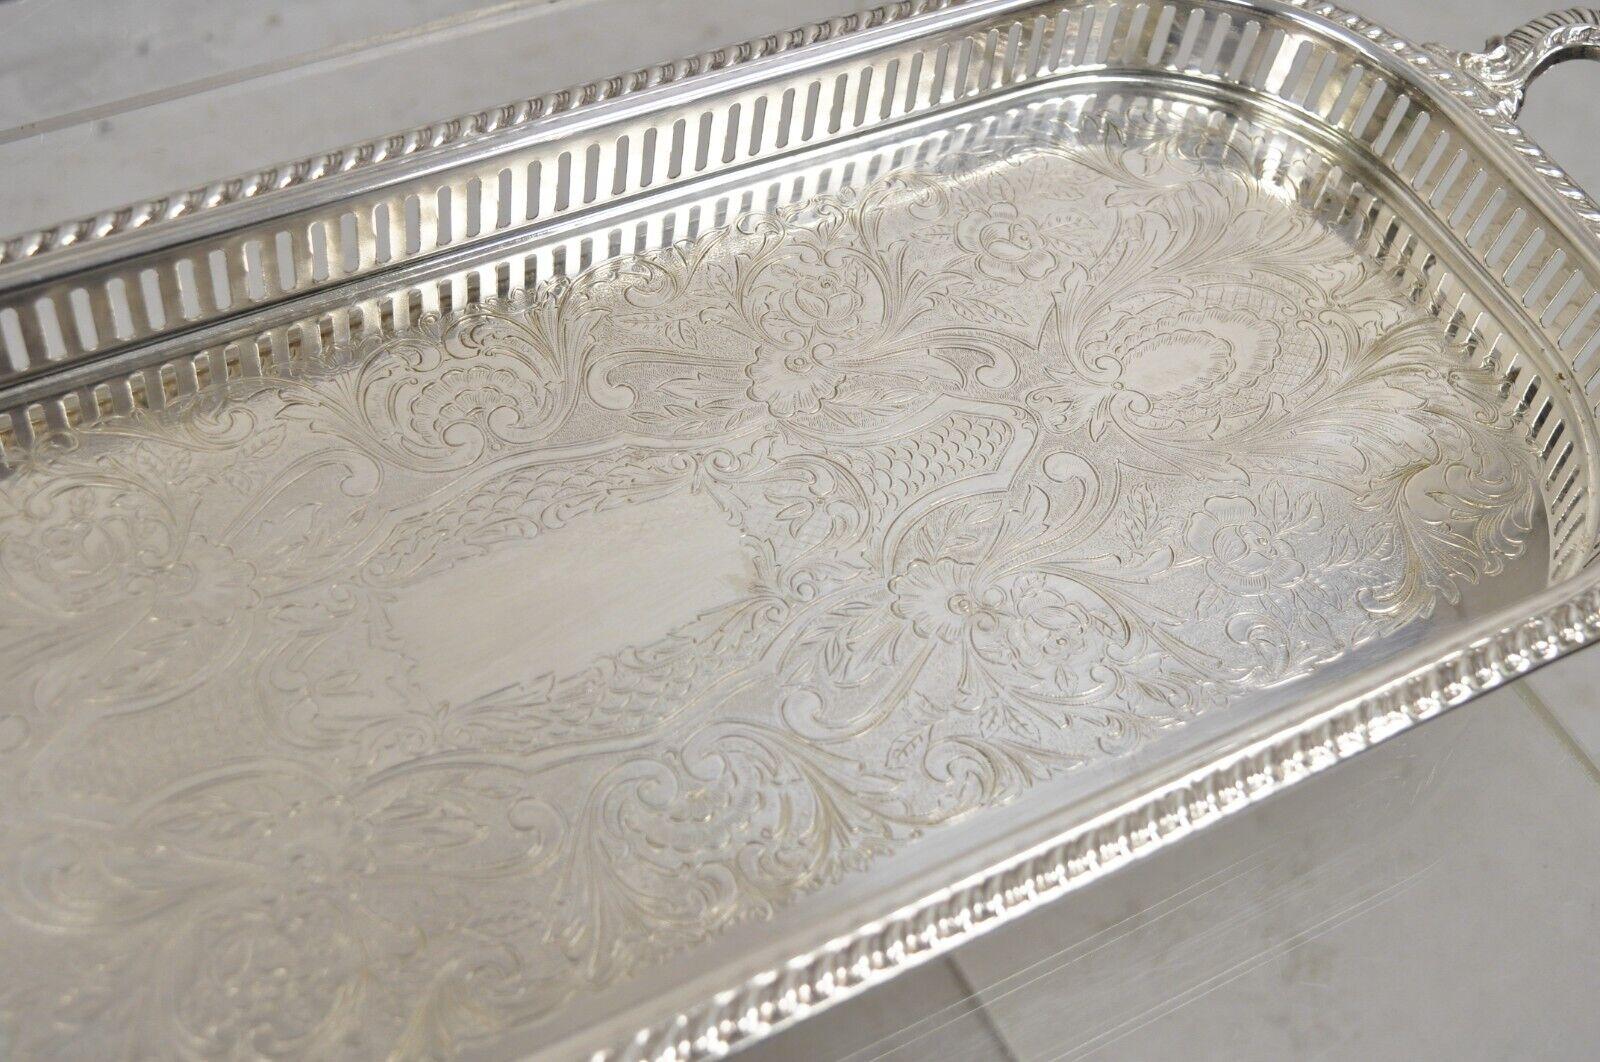 Vtg Victorian Style Silver Plated Narrow Oval Serving Platter Tray by Regency For Sale 5